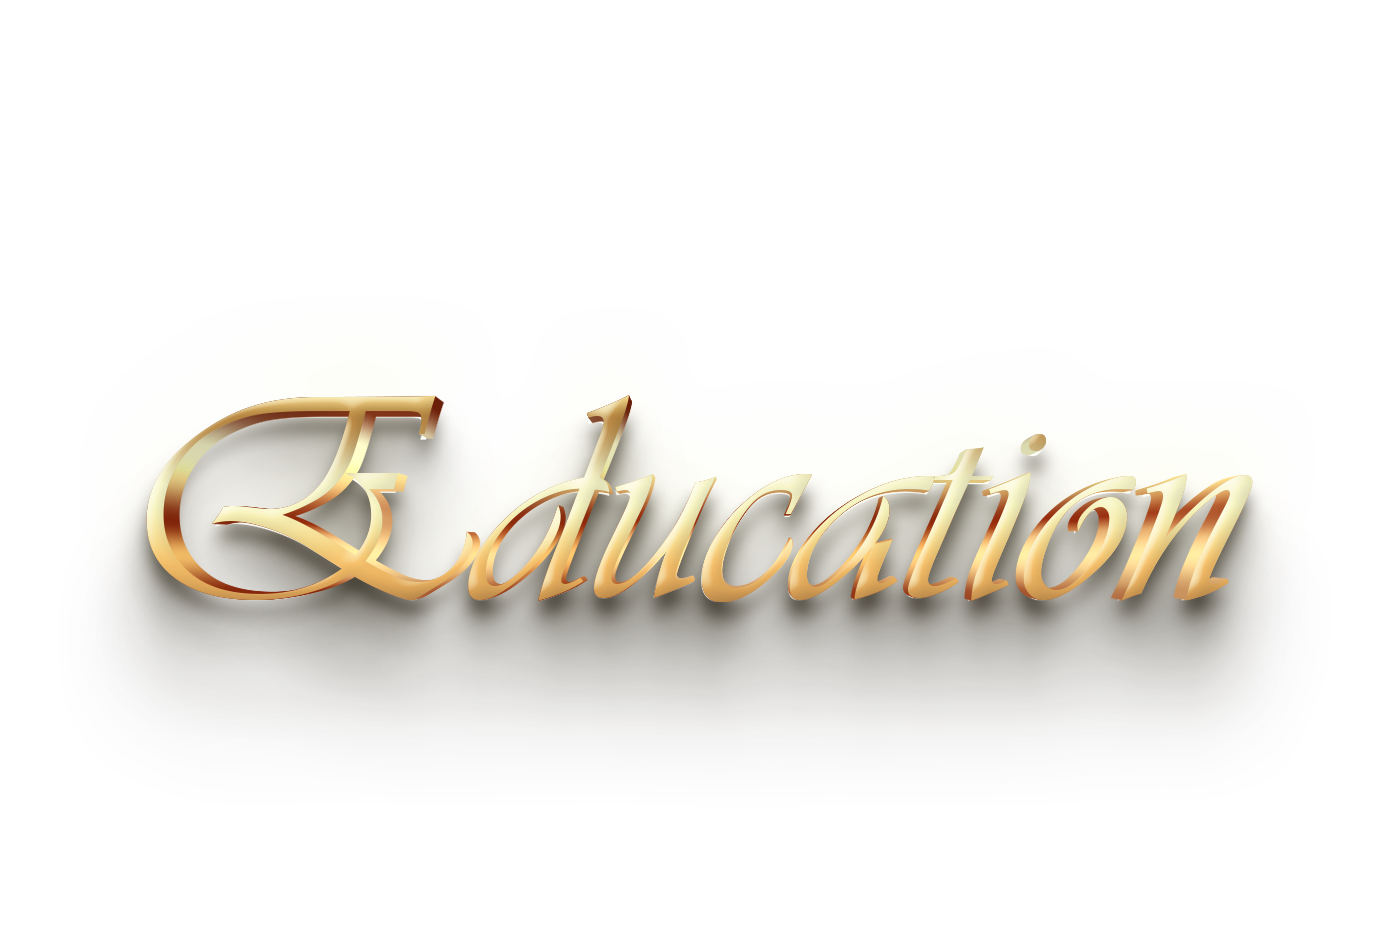 WORD EDUCATION gold 3D text effects art typography PNG images free